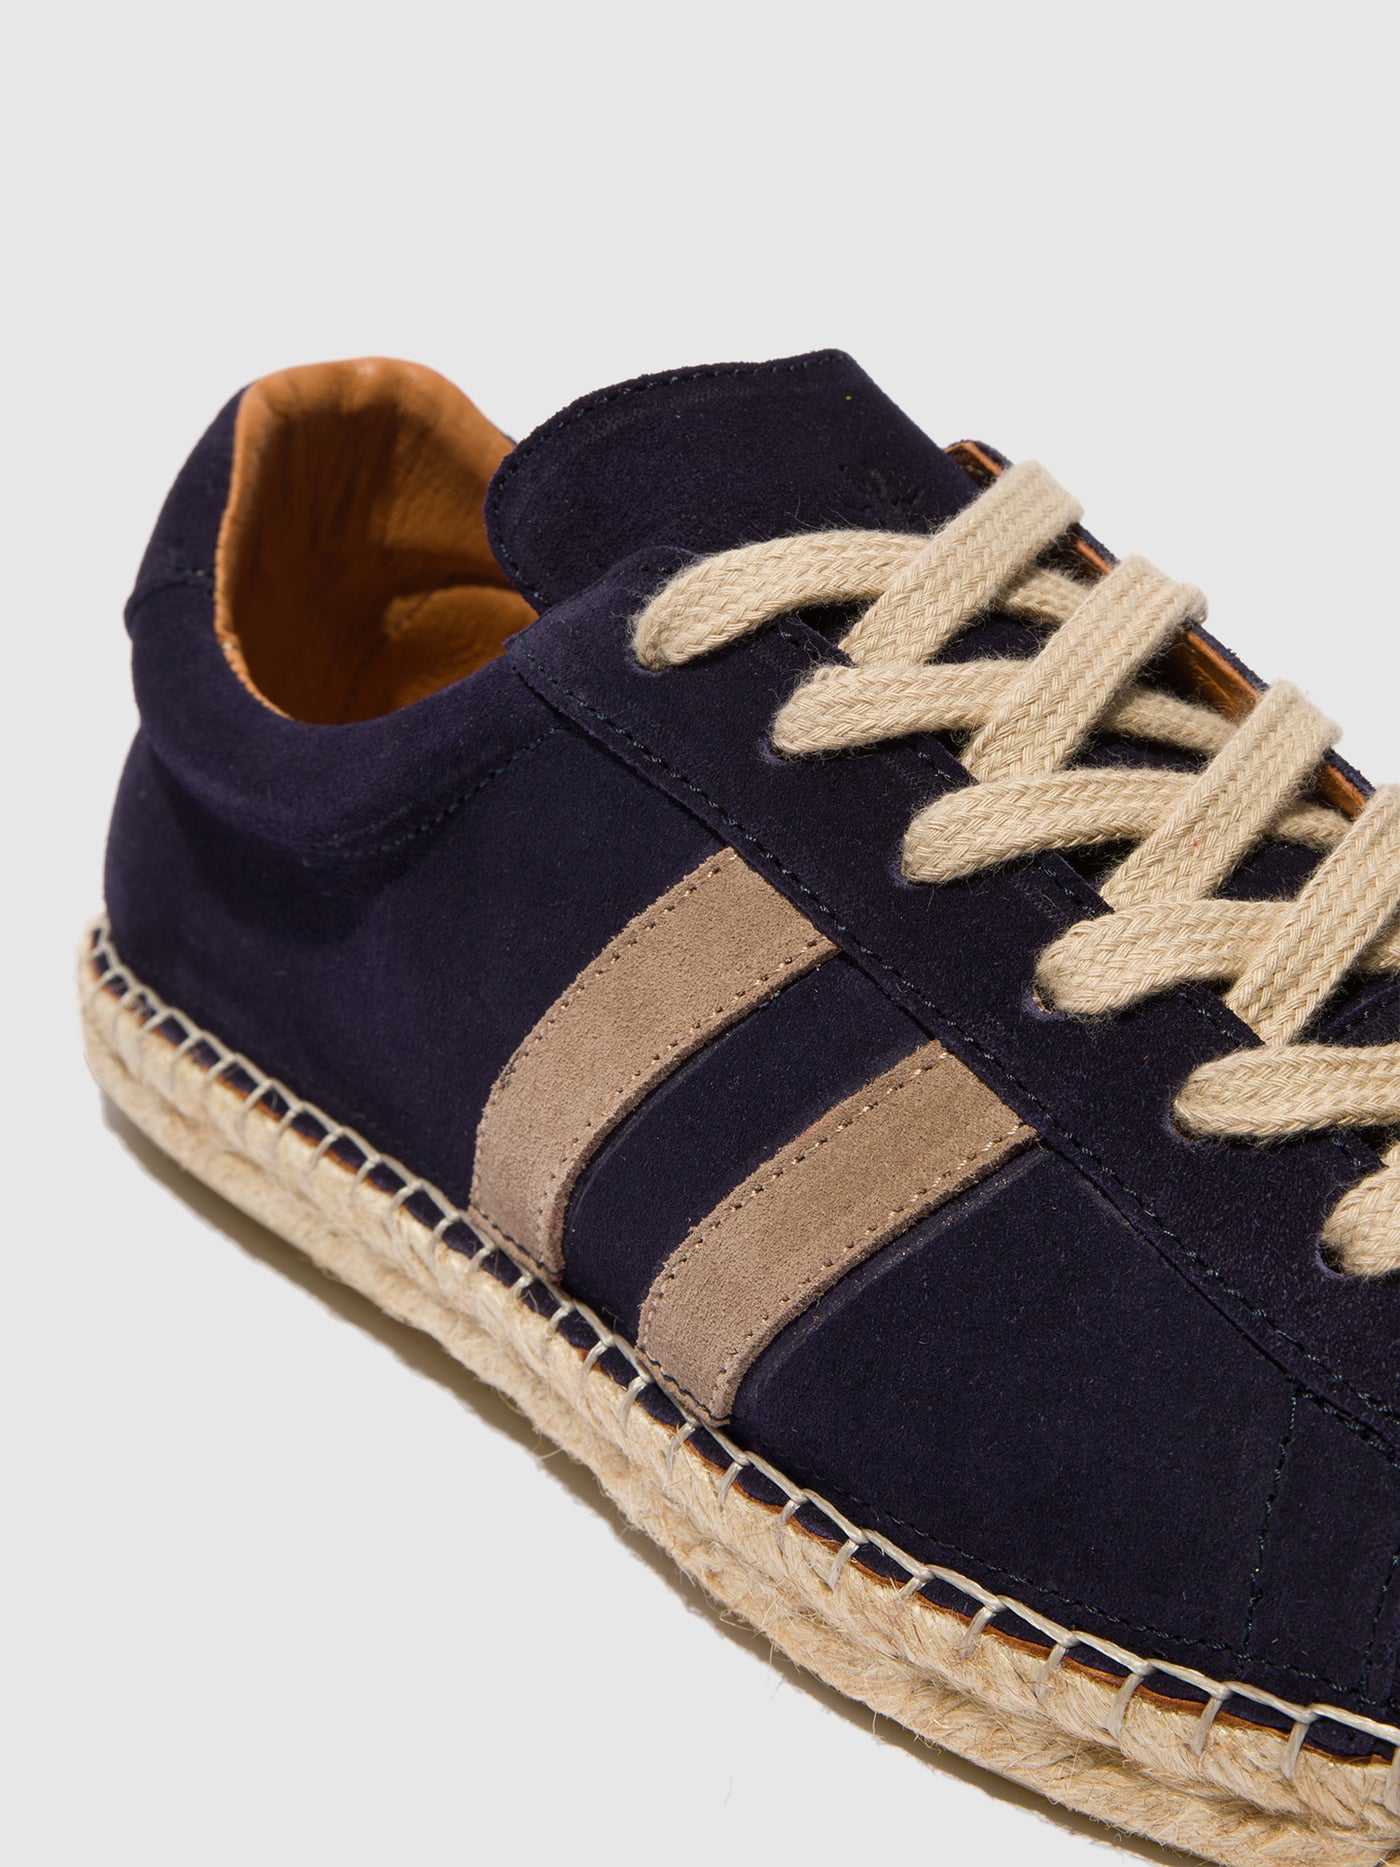 Lace-up Espadrilles SCAW530FLY NAVY/SAND